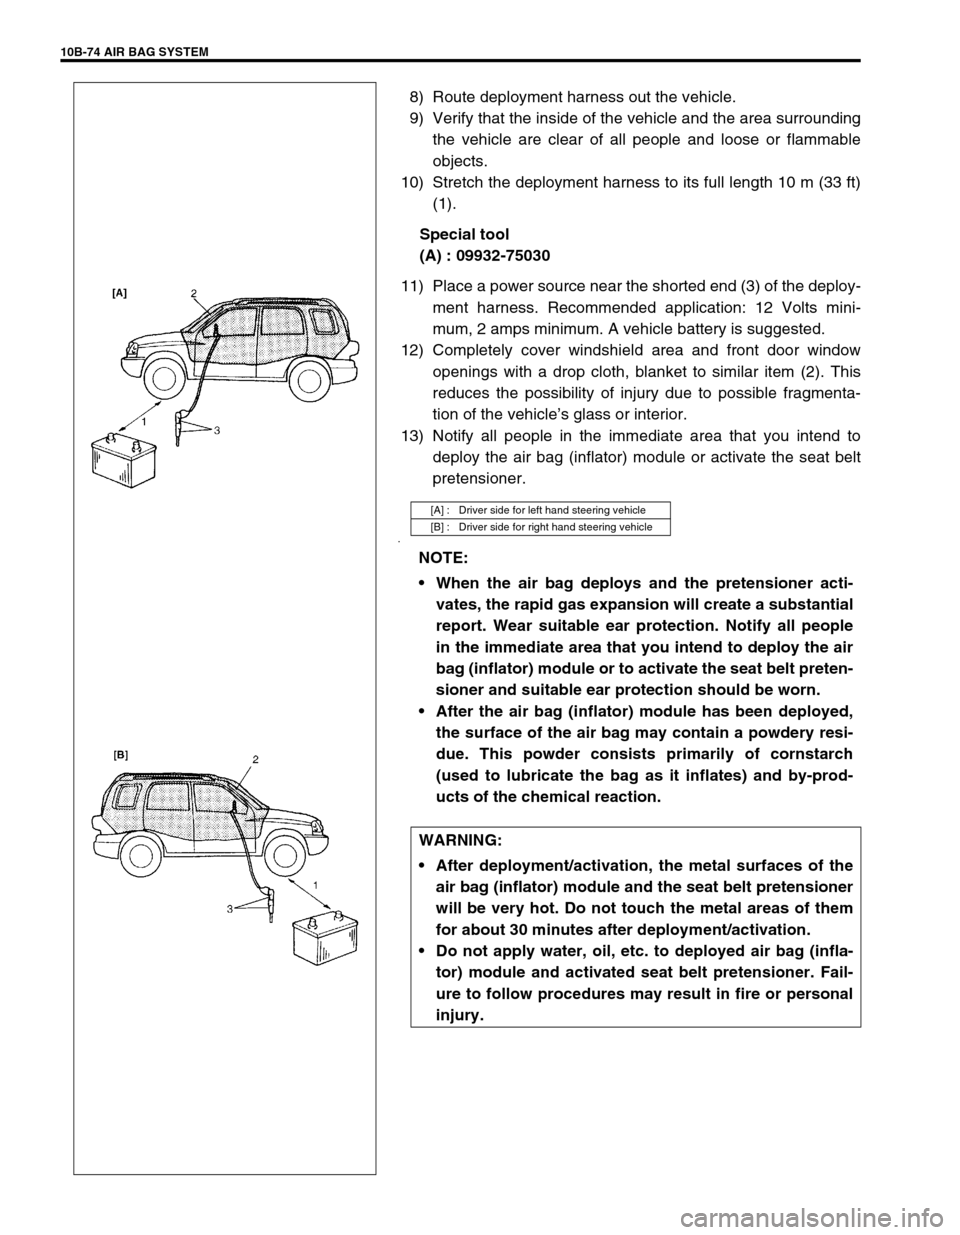 SUZUKI GRAND VITARA 2001 2.G Owners Manual 10B-74 AIR BAG SYSTEM
8) Route deployment harness out the vehicle. 
9) Verify that the inside of the vehicle and the area surrounding
the vehicle are clear of all people and loose or flammable
objects